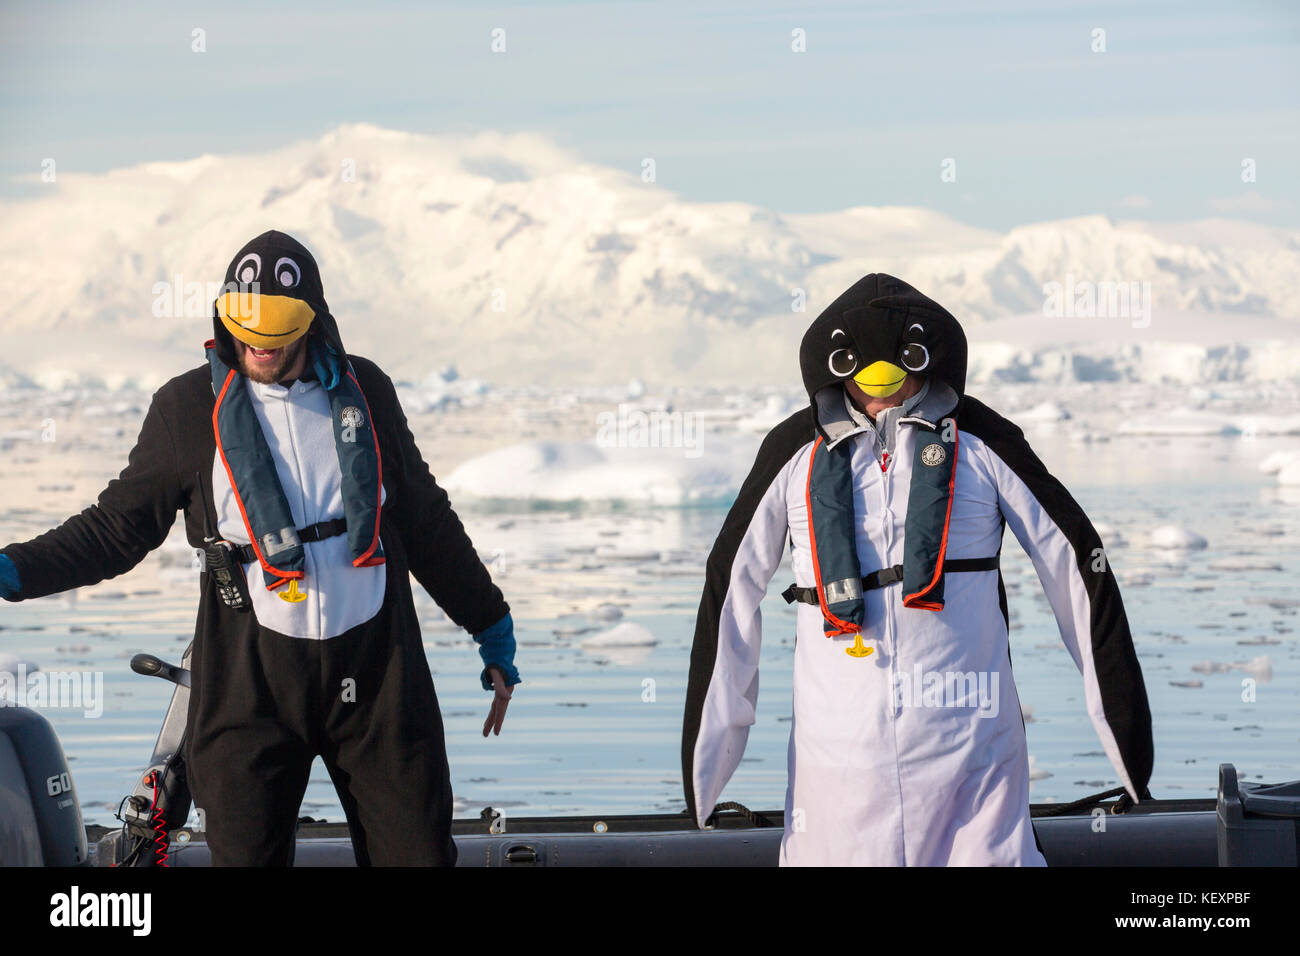 Crew members of an expedition cruise to Antarctica in a Zodiak in Fournier Bay in the Gerlache Strait on the Antarctic peninsula, dressed up as penguins. The Antarctic peninsula is one of the most rapidly warming areas on the planet. Stock Photo